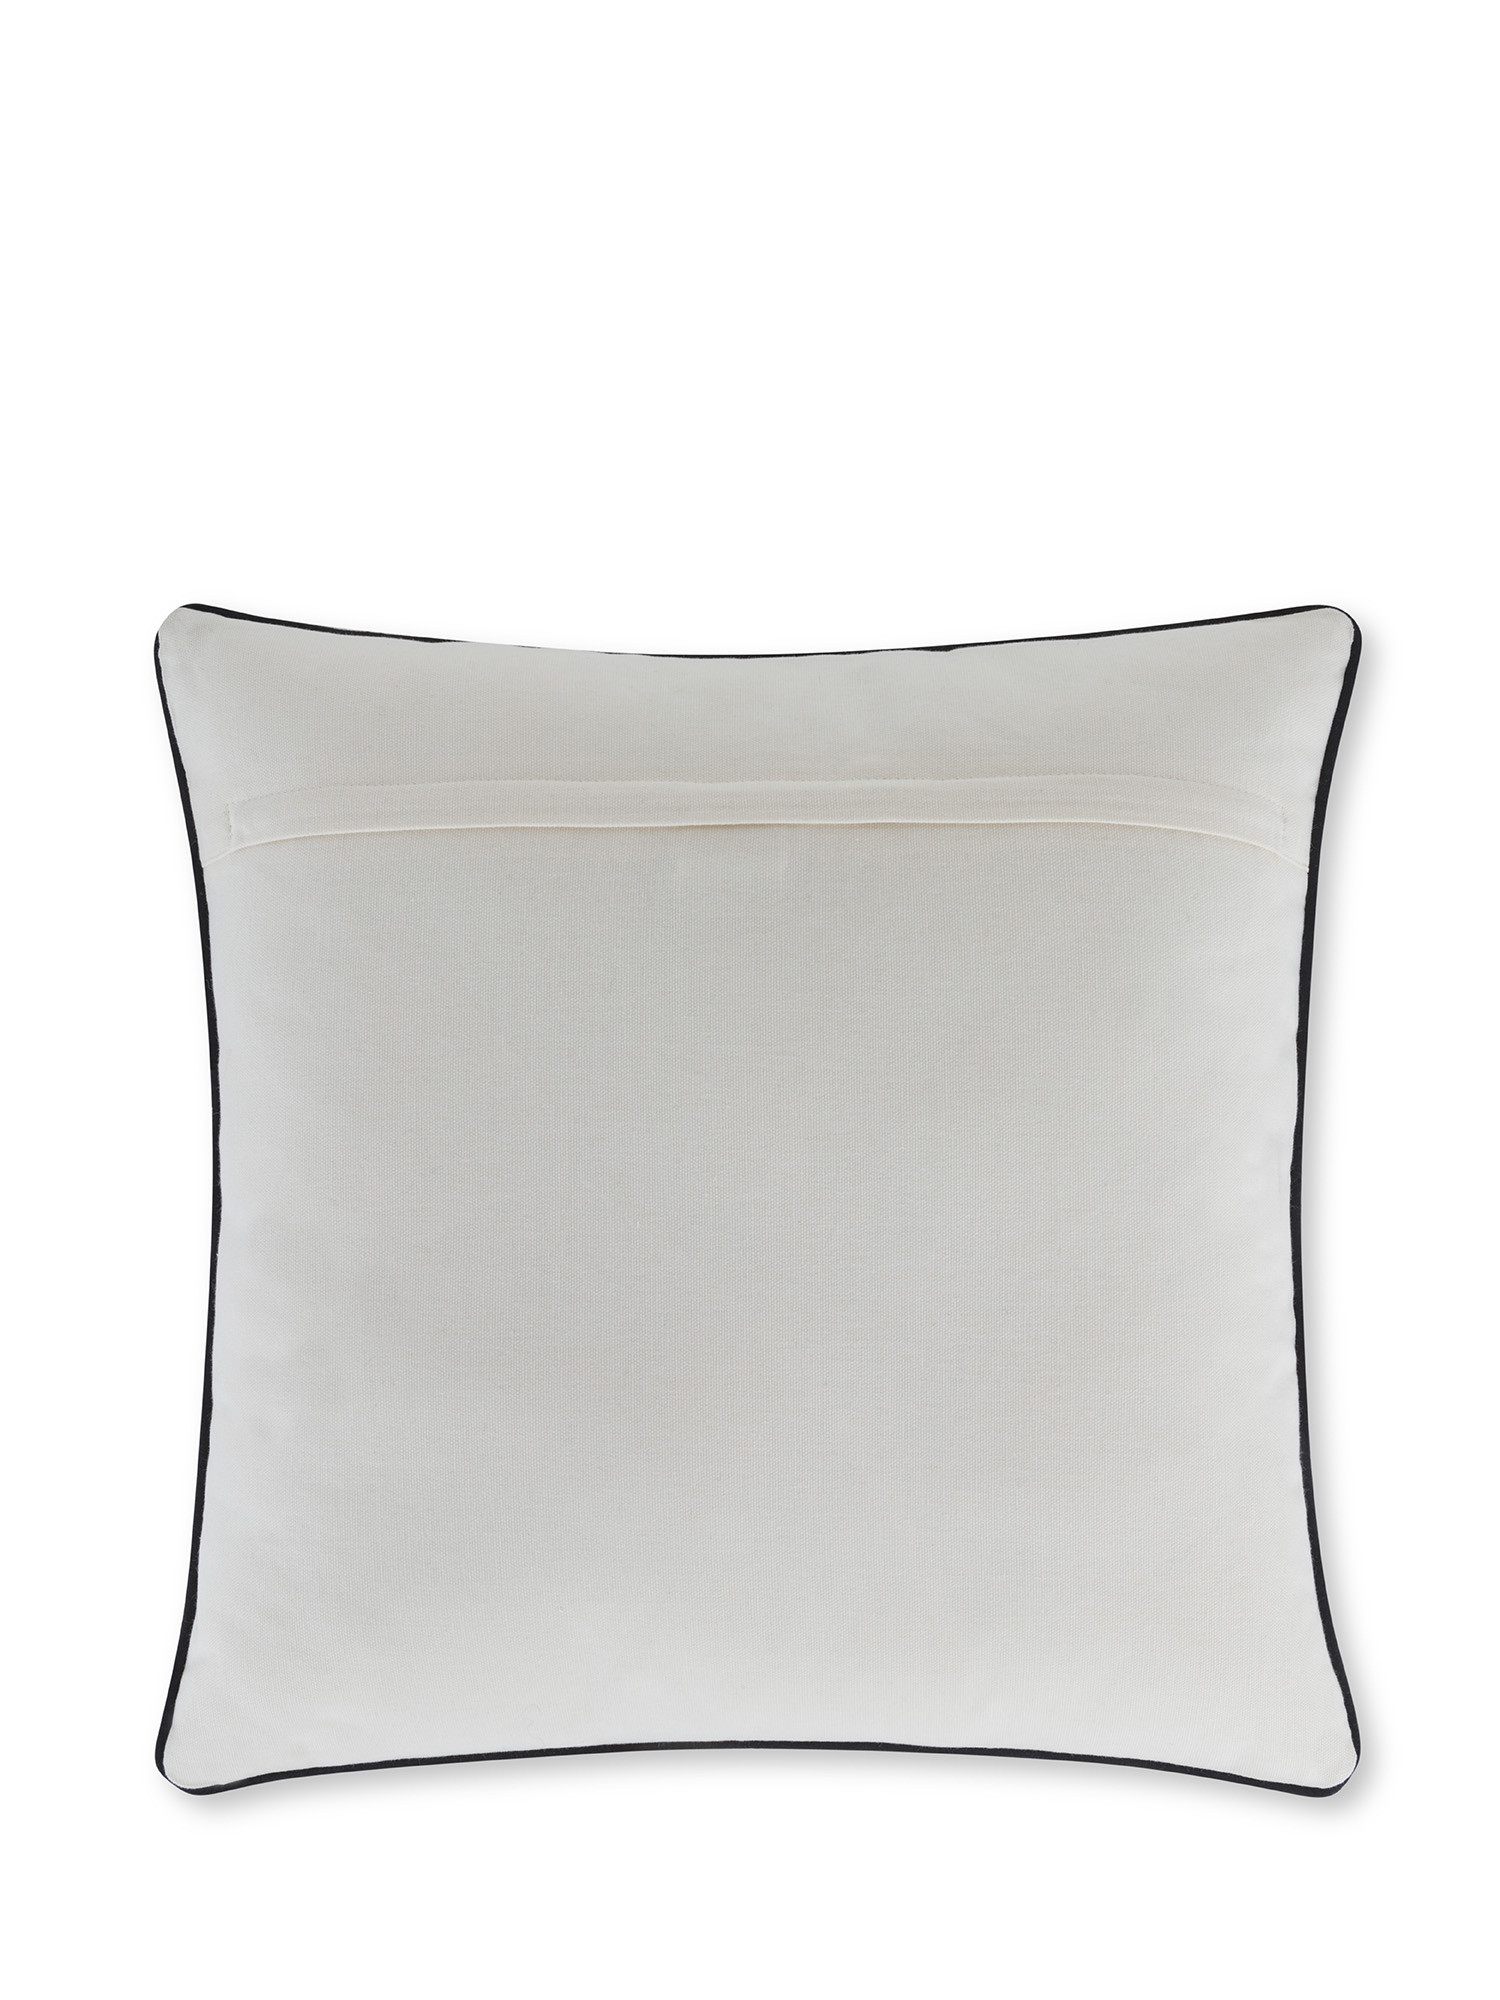 Cushion with flowers embroidered in relief 45x45 cm, White, large image number 1